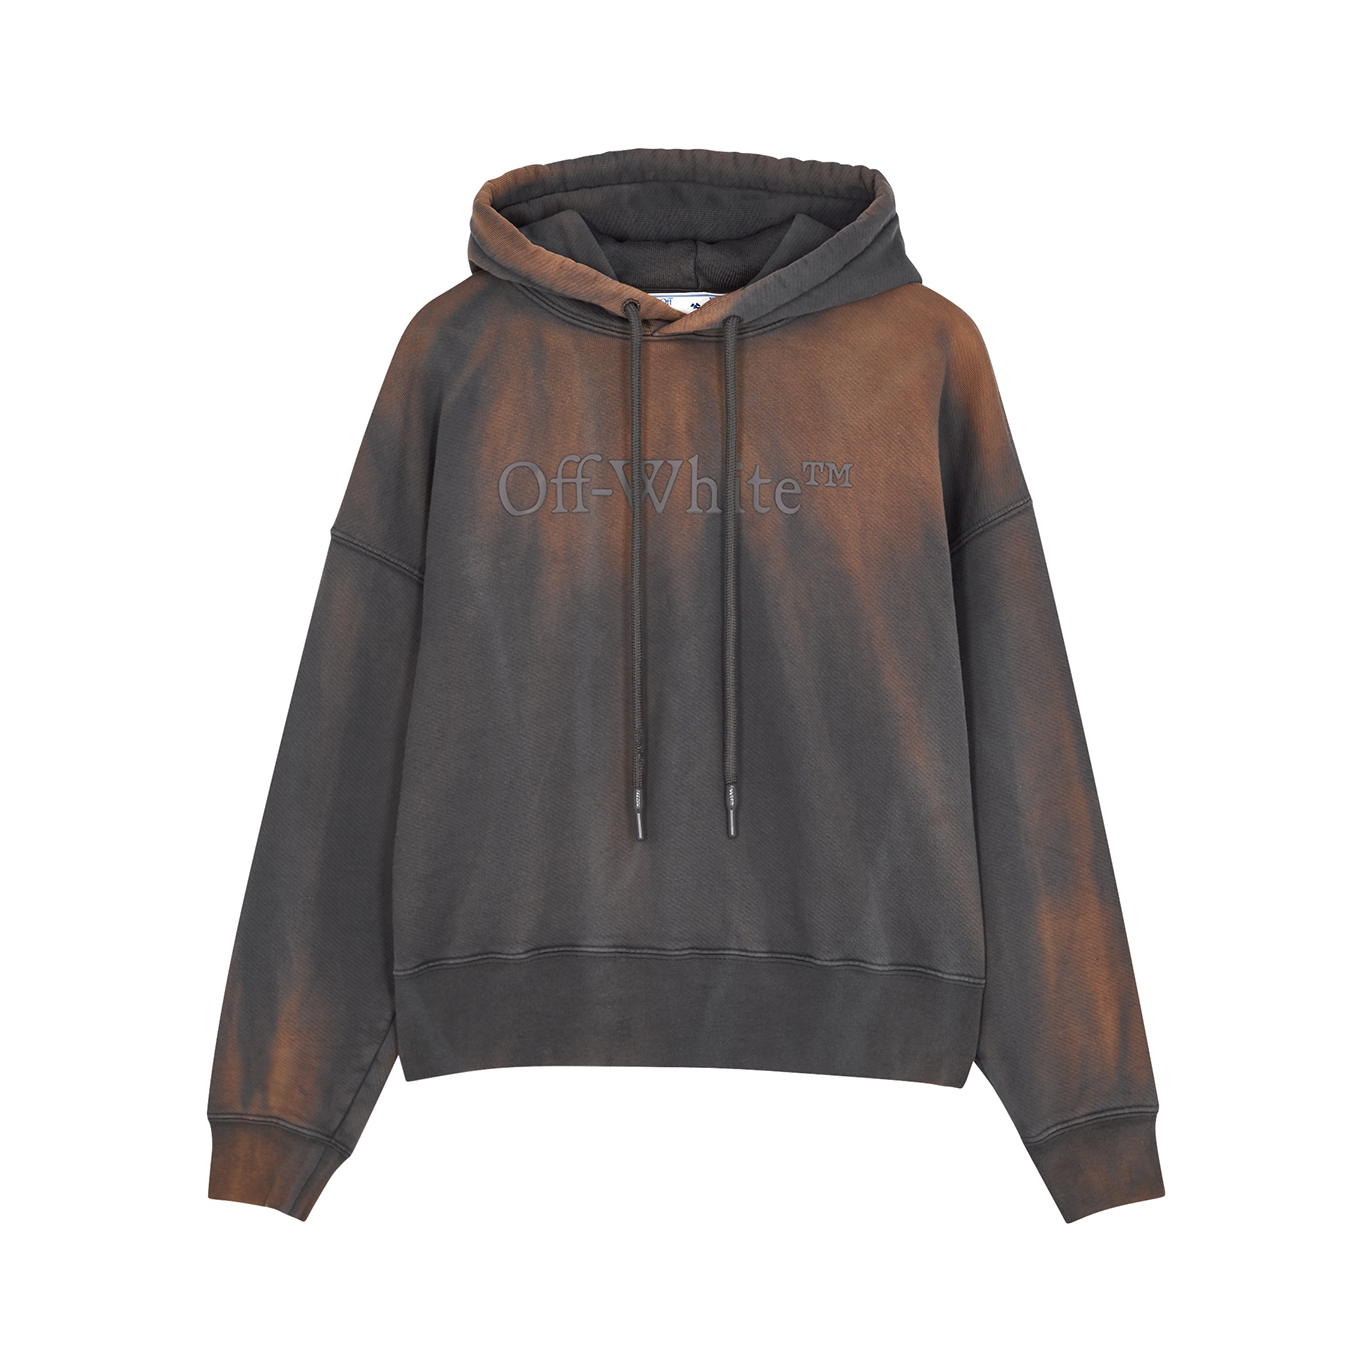 Off-White Laundry Hooded Bleached Cotton Sweatshirt - Brown - L